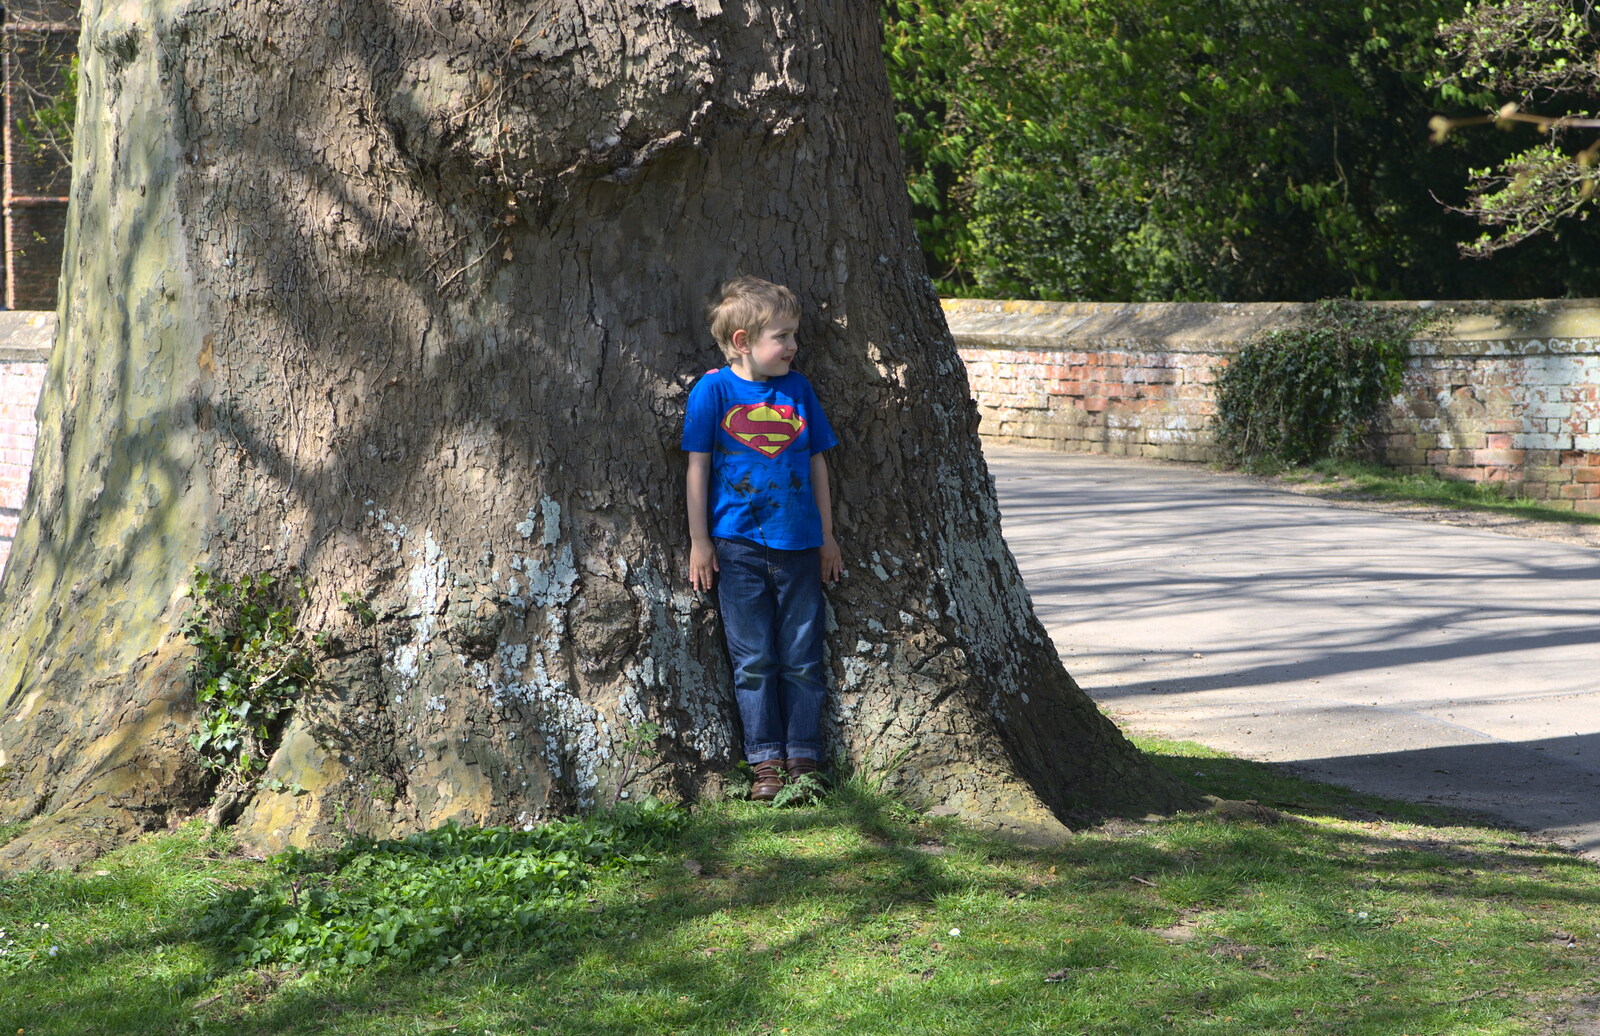 Fred hides in a tree from A Trip to Audley End House, Saffron Walden, Essex - 16th April 2014